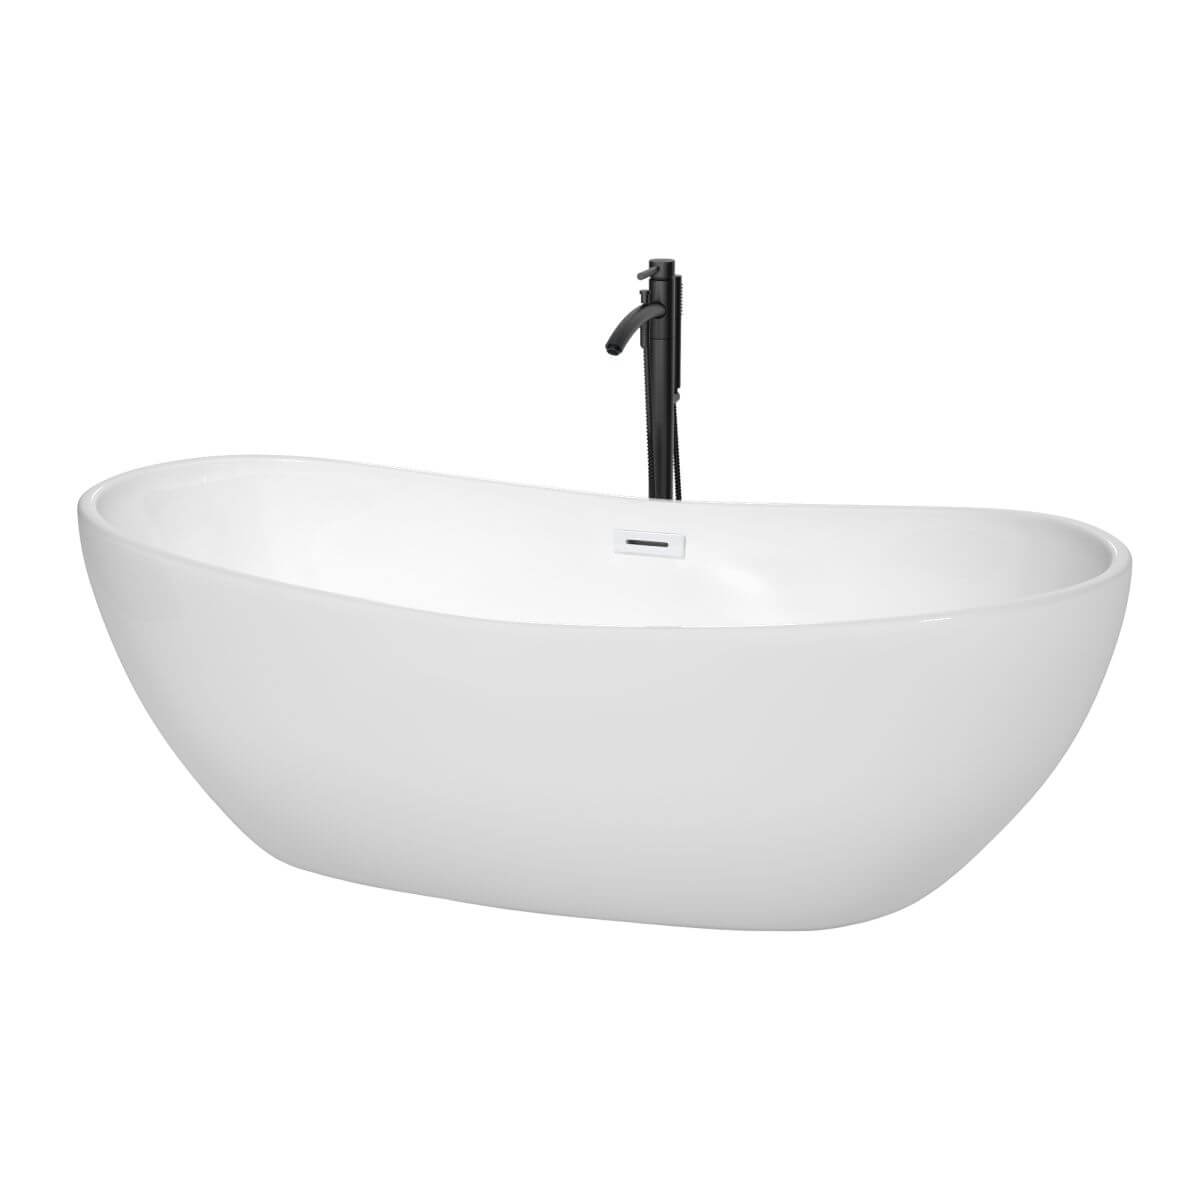 Wyndham Collection Rebecca 70 inch Freestanding Bathtub in White with Shiny White Trim and Floor Mounted Faucet in Matte Black - WCOBT101470SWATPBK